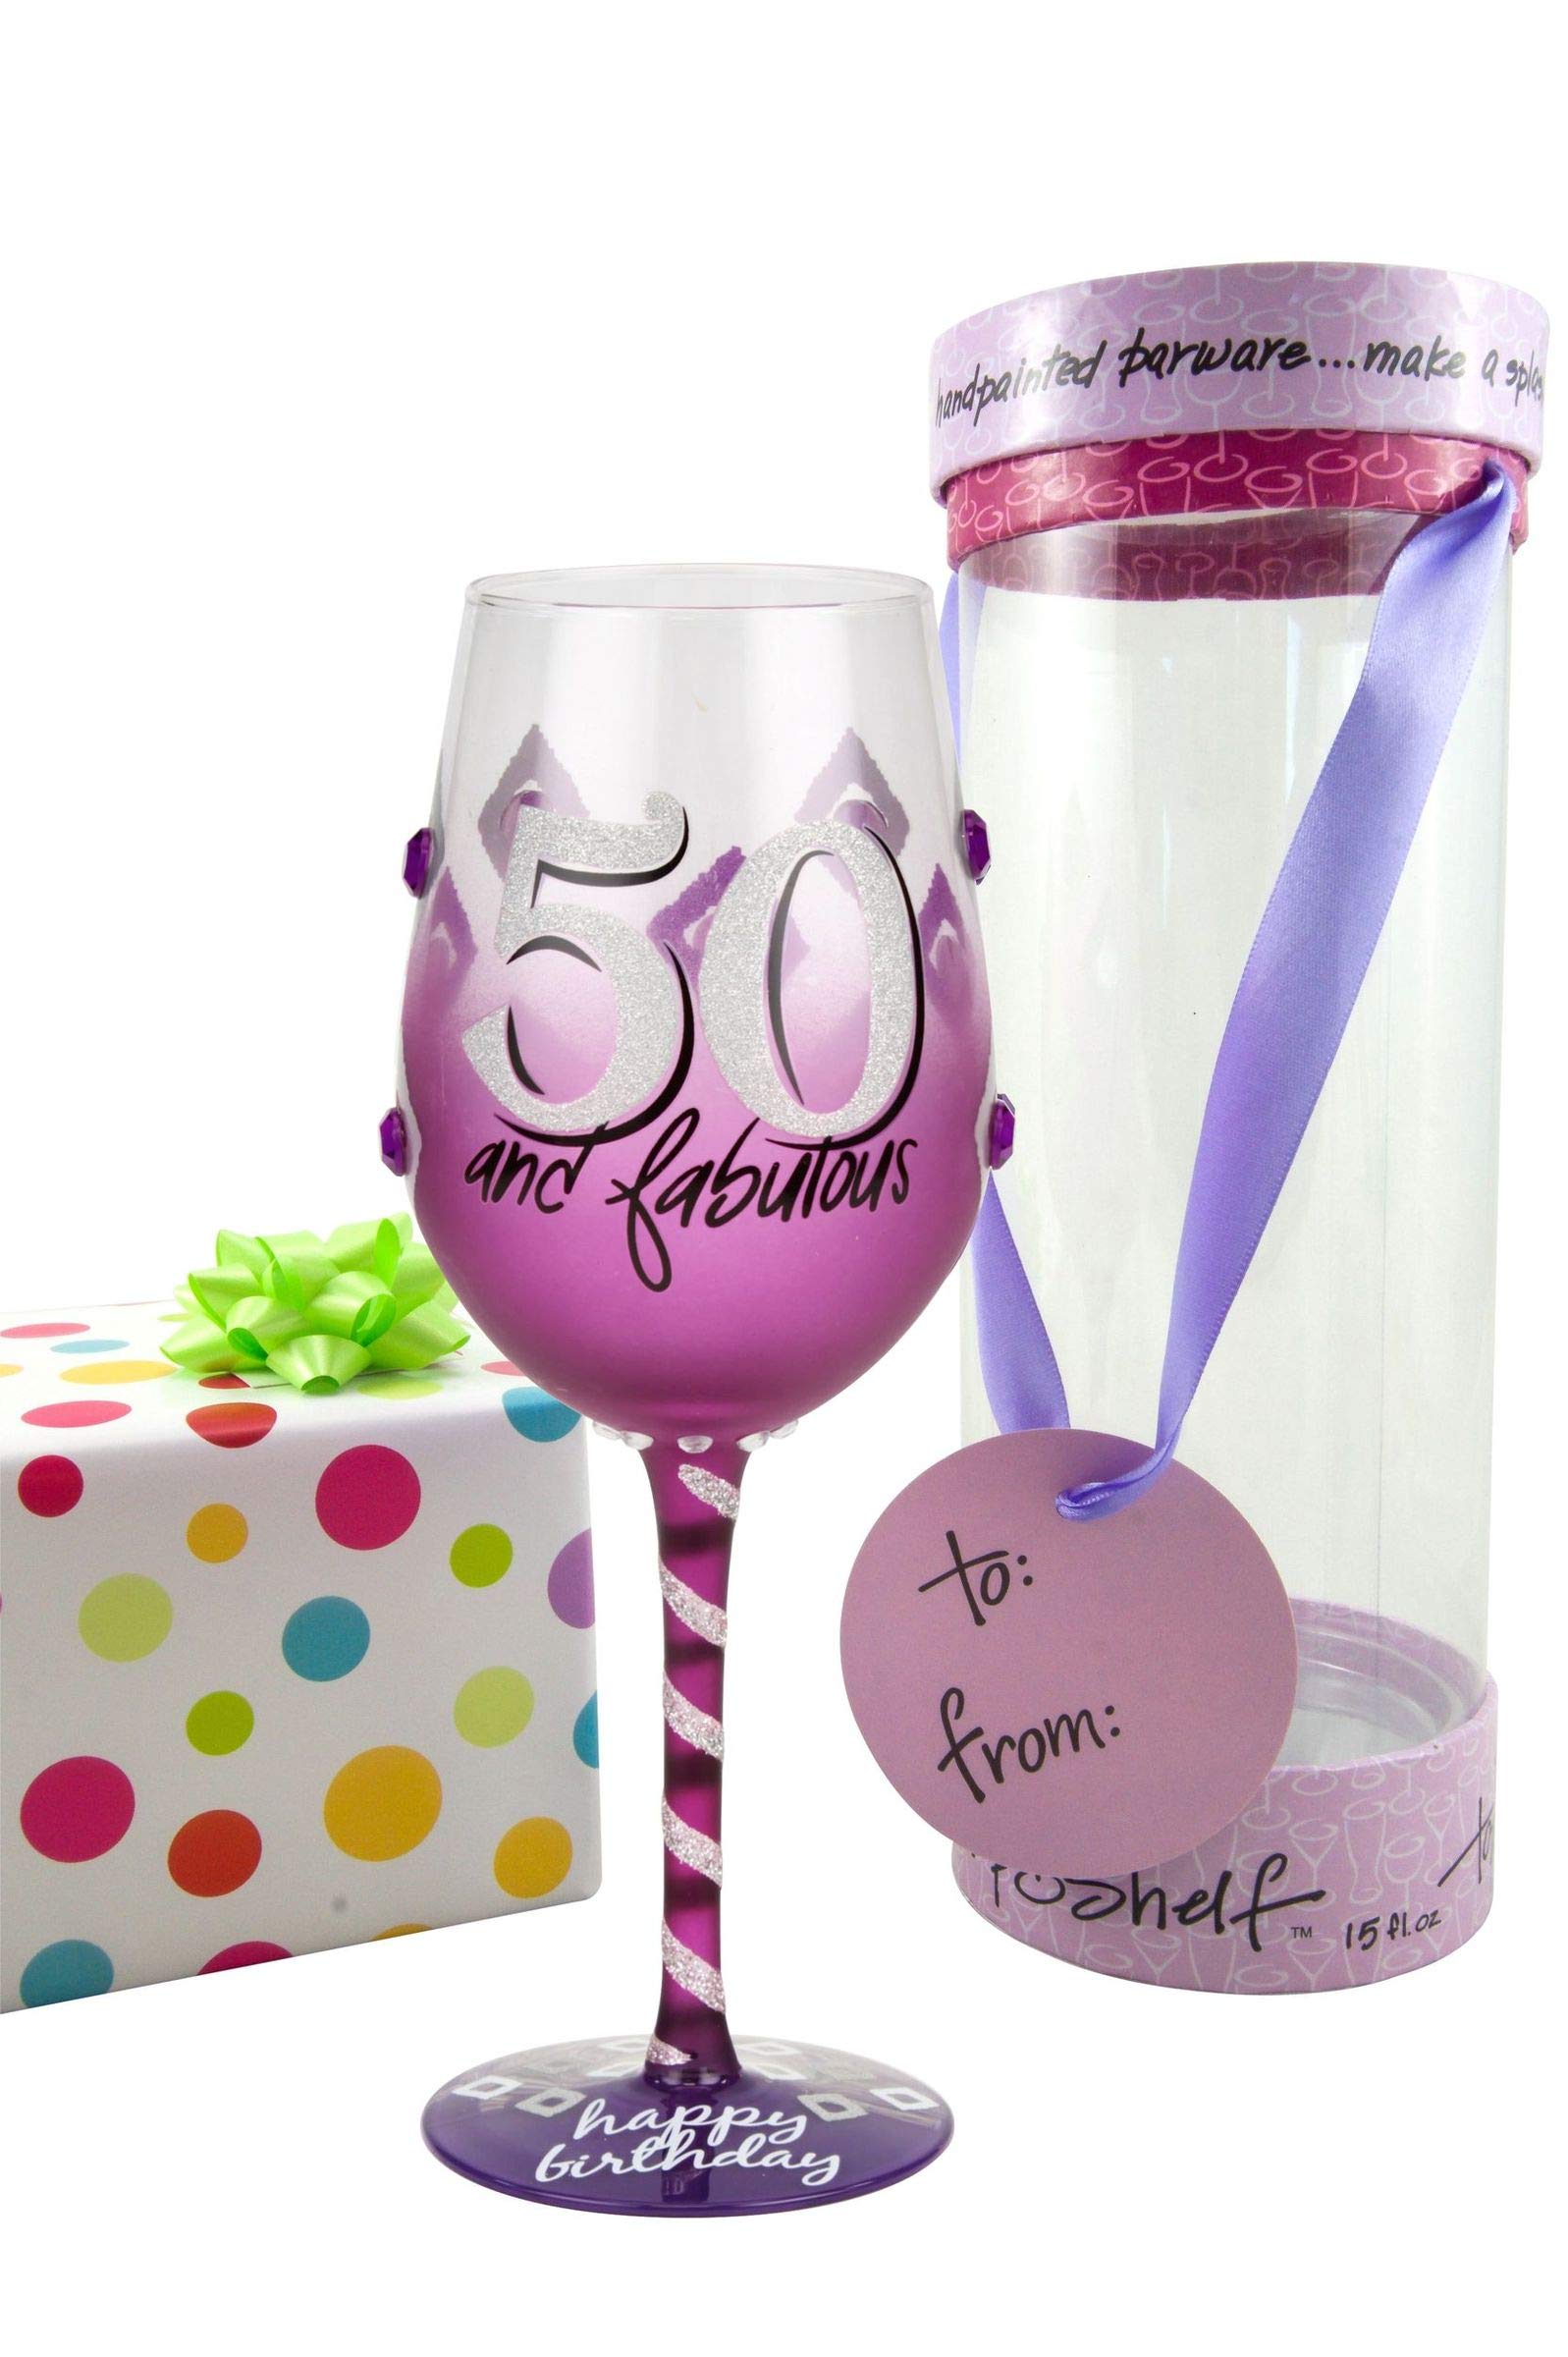 Top Shelf 50th Birthday Wine Glass ; Unique & Thoughtful Gift Ideas for Friends and Family ; Hand Painted Red or White Wine Glass for Mom, Grandma, and Sister